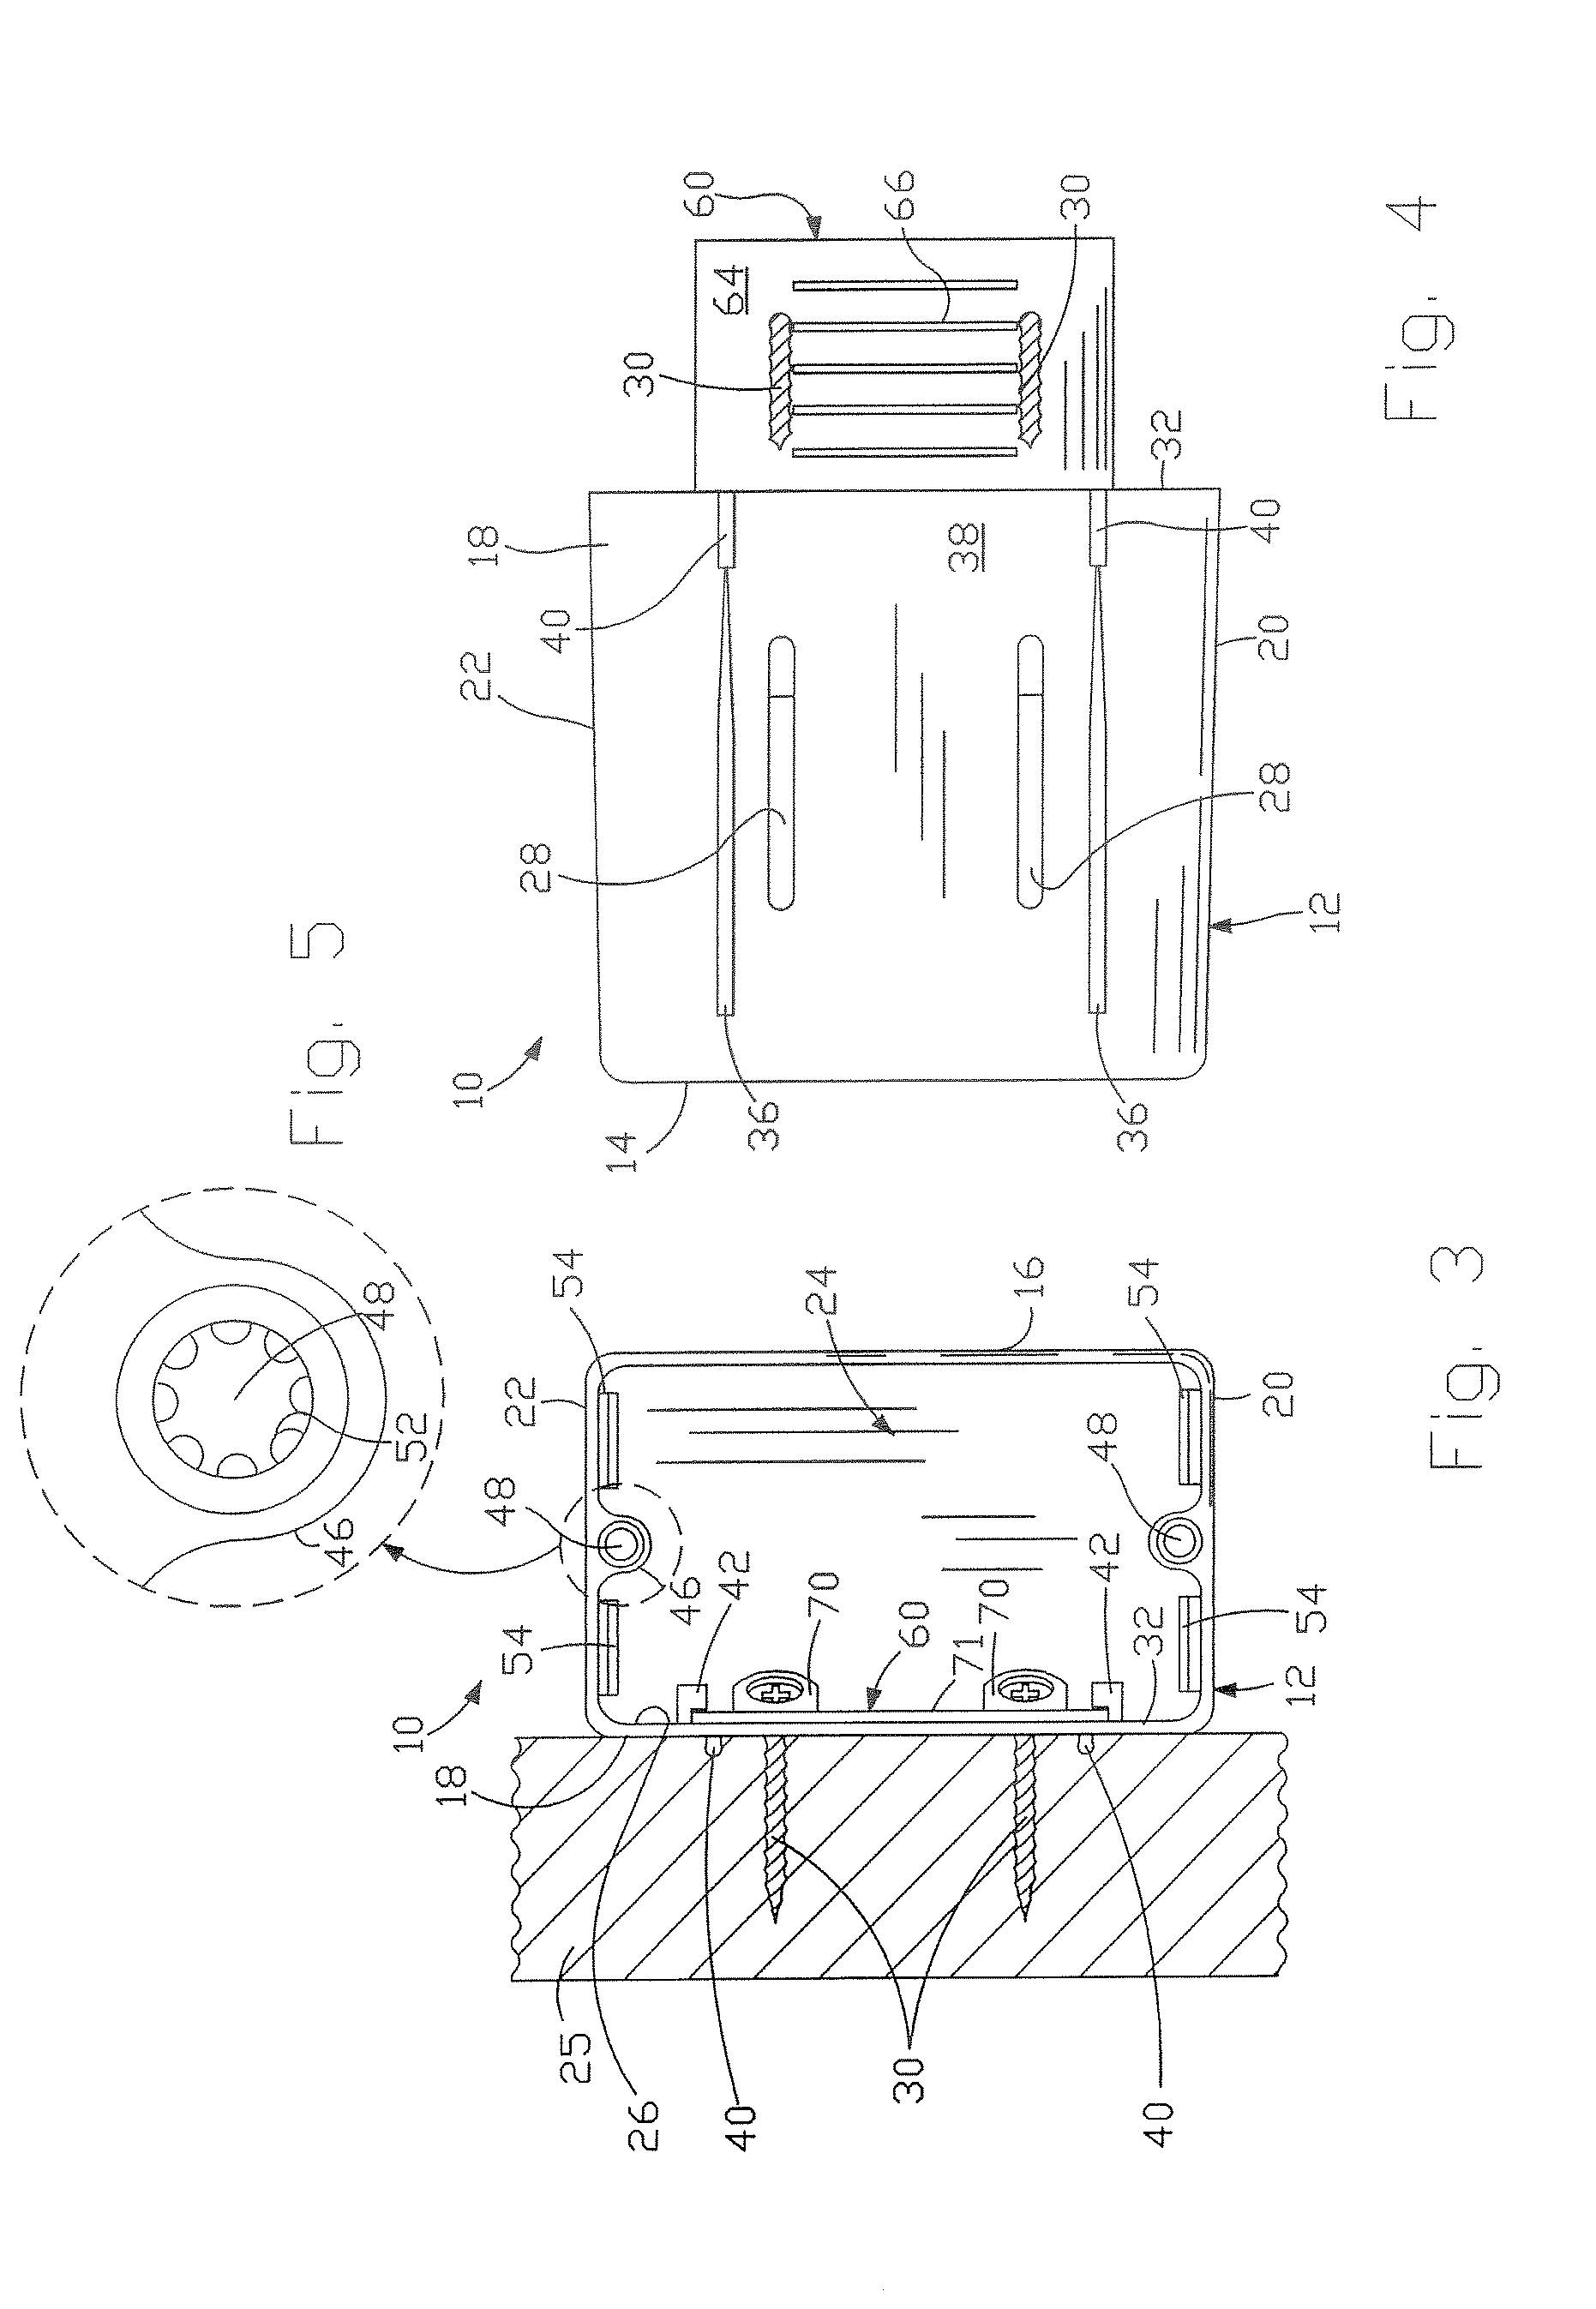 Electrical box with movable mounting system